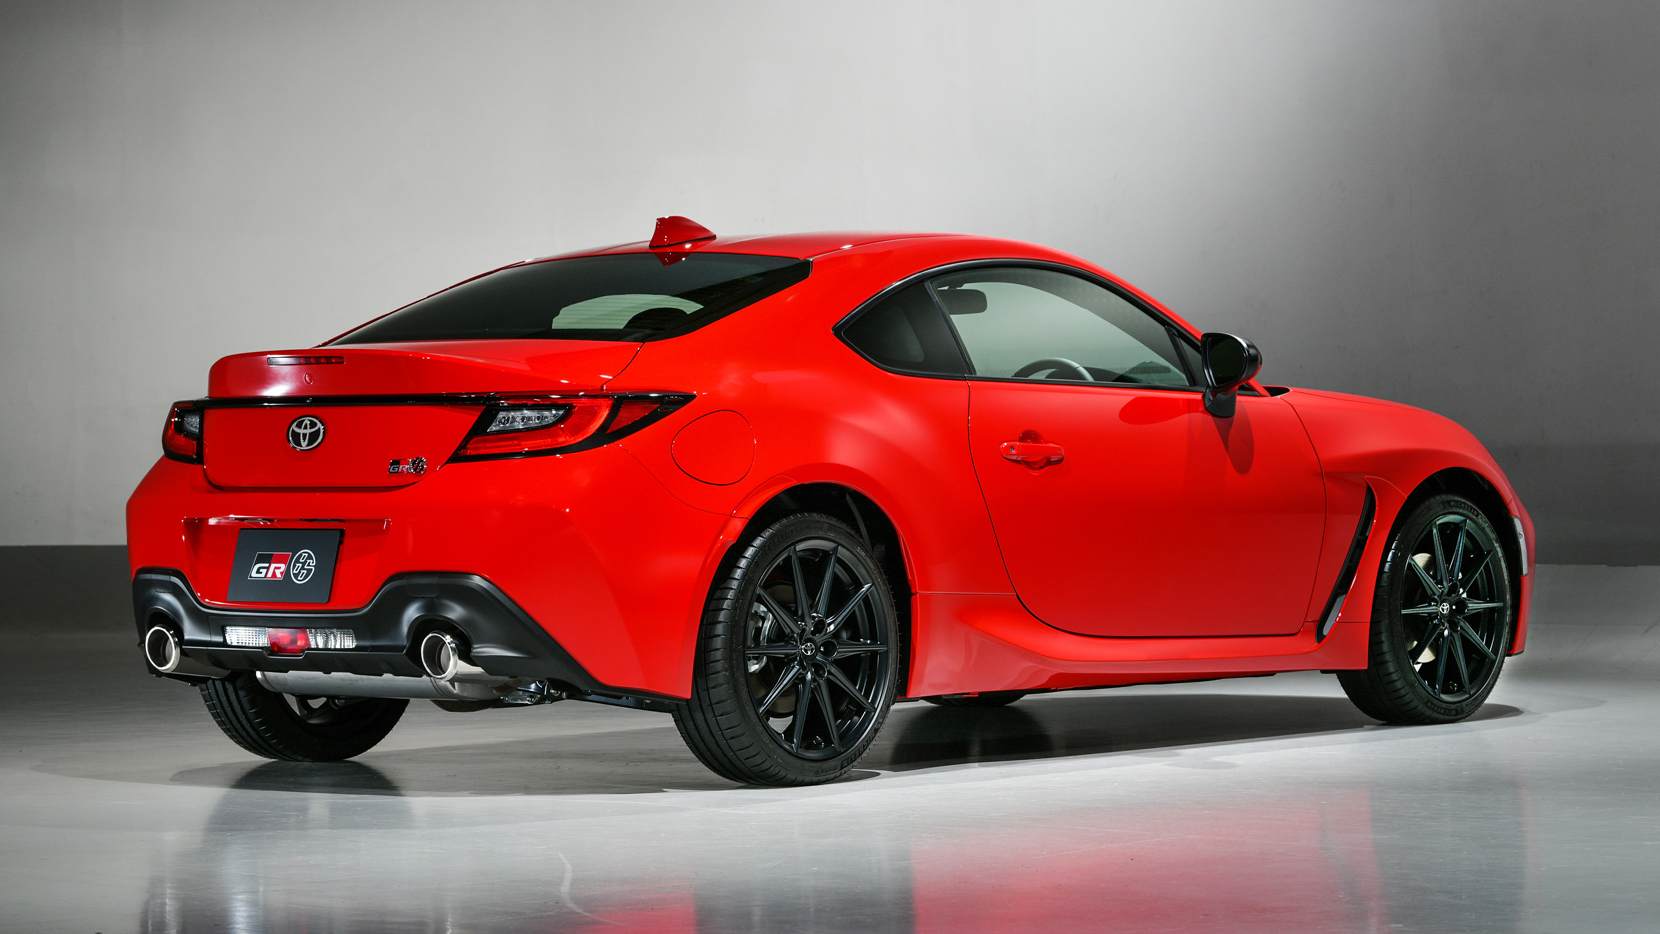 Toyota claims the new GR 86 is 50 percent stiffer than the GT 86. Image: Toyota